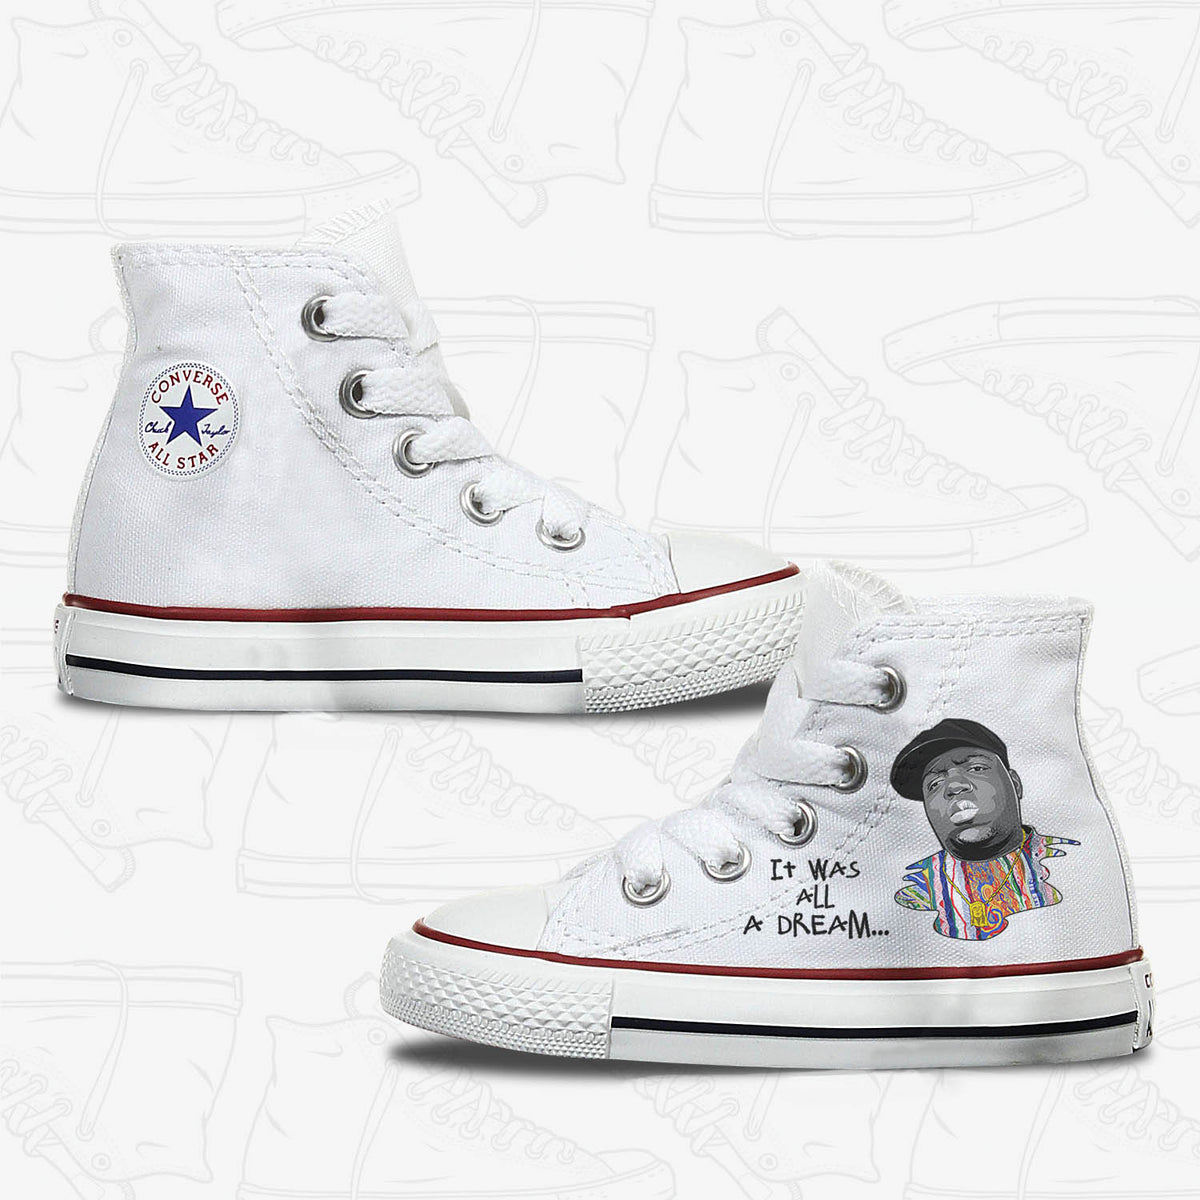 Notorious BIG Toddler Custom Converse Shoes